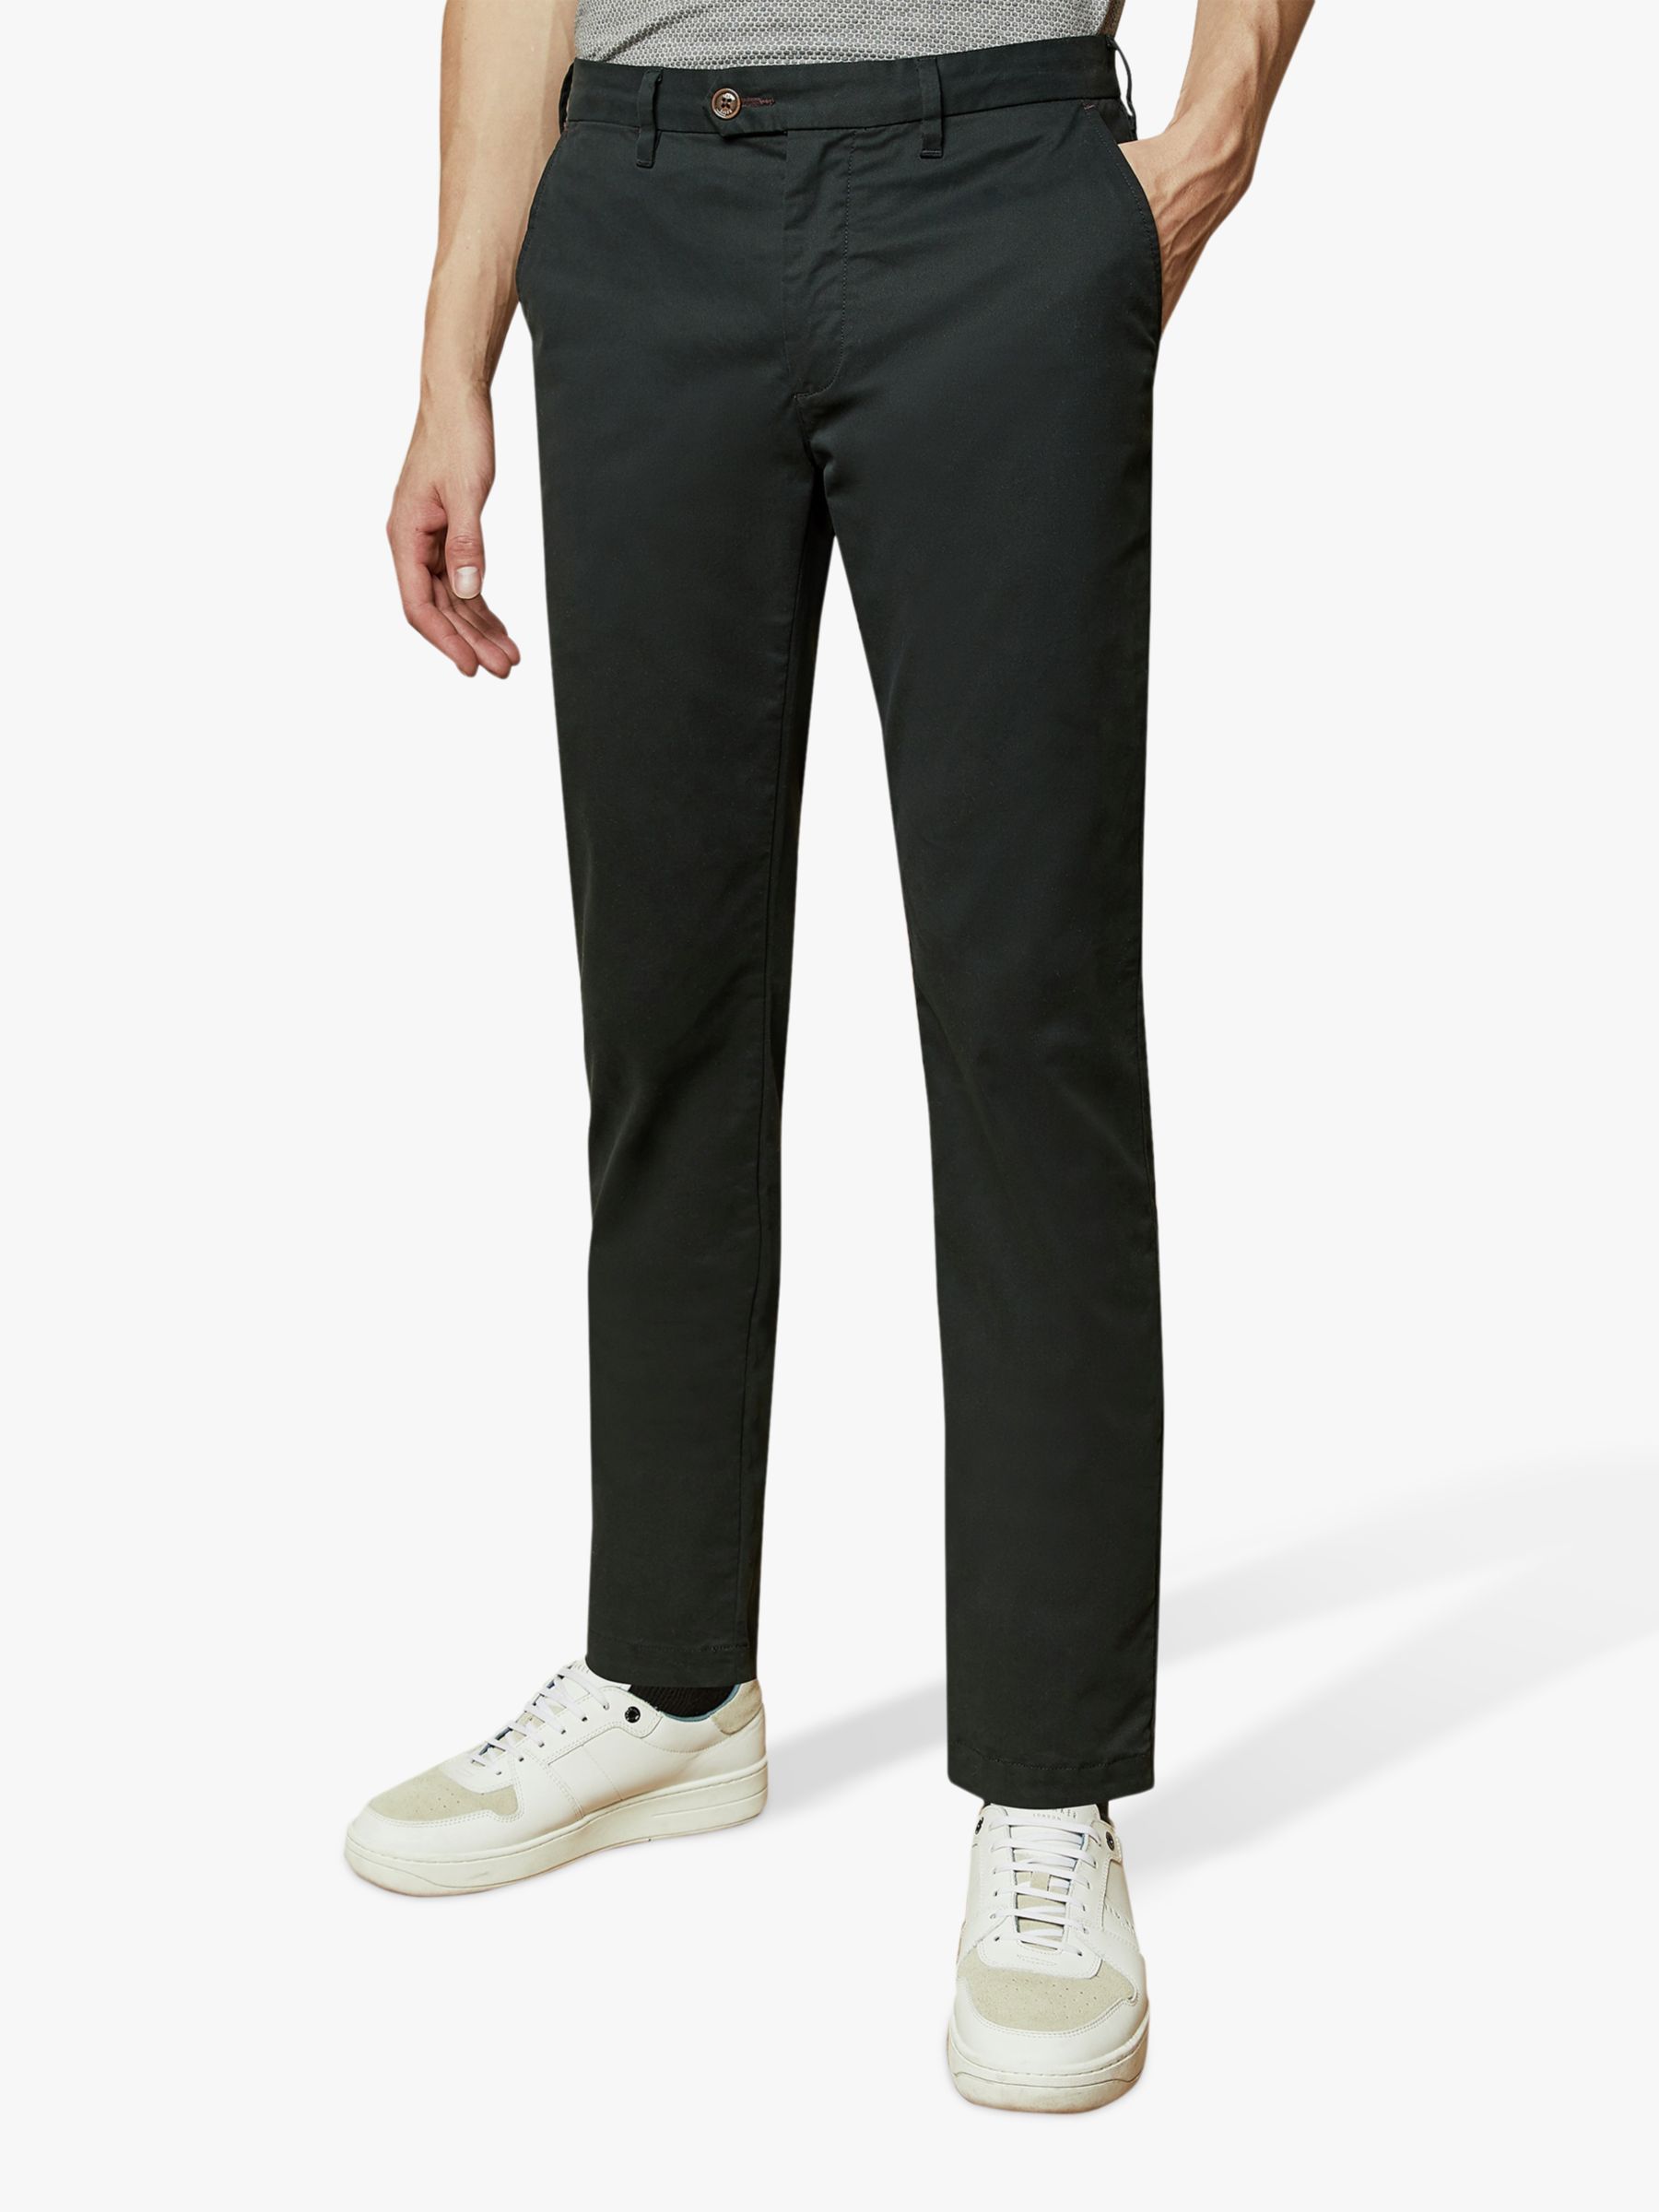 Ted Baker Clenchi Slim Fit Chinos